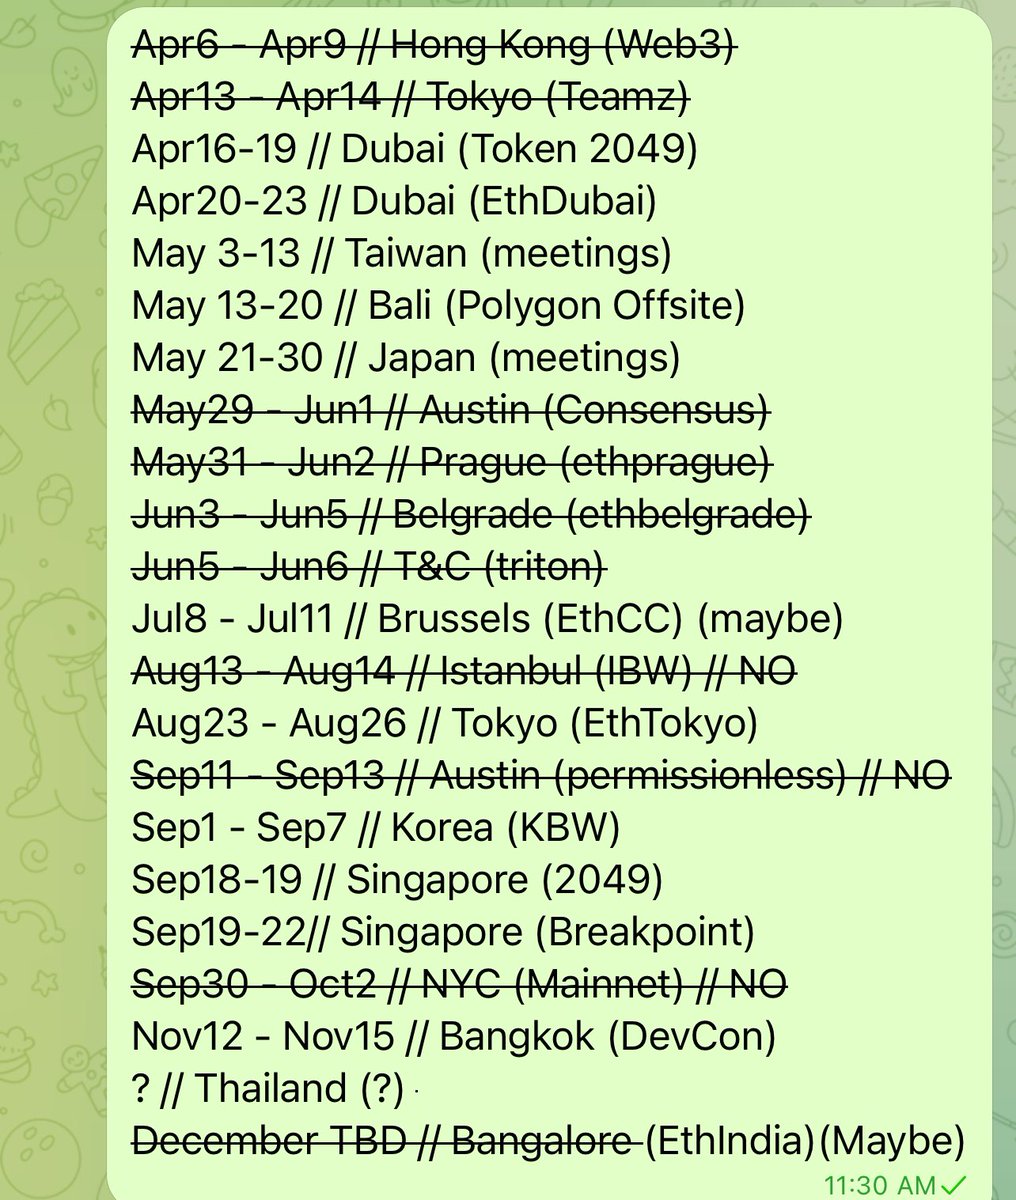 @DogechainFamily Event Schedule for 2024
Screenshot below with my schedule. Above is copy pasteable schedule for anyone who wants to use. 

Apr6 - Apr9 // Hong Kong (Web3)
Apr13 - Apr14 // Tokyo (Teamz)
Apr16-19 // Dubai (Token 2049)
Apr20-23 // Dubai (EthDubai)
May 3-13 // Taiwan (meetings)
May…